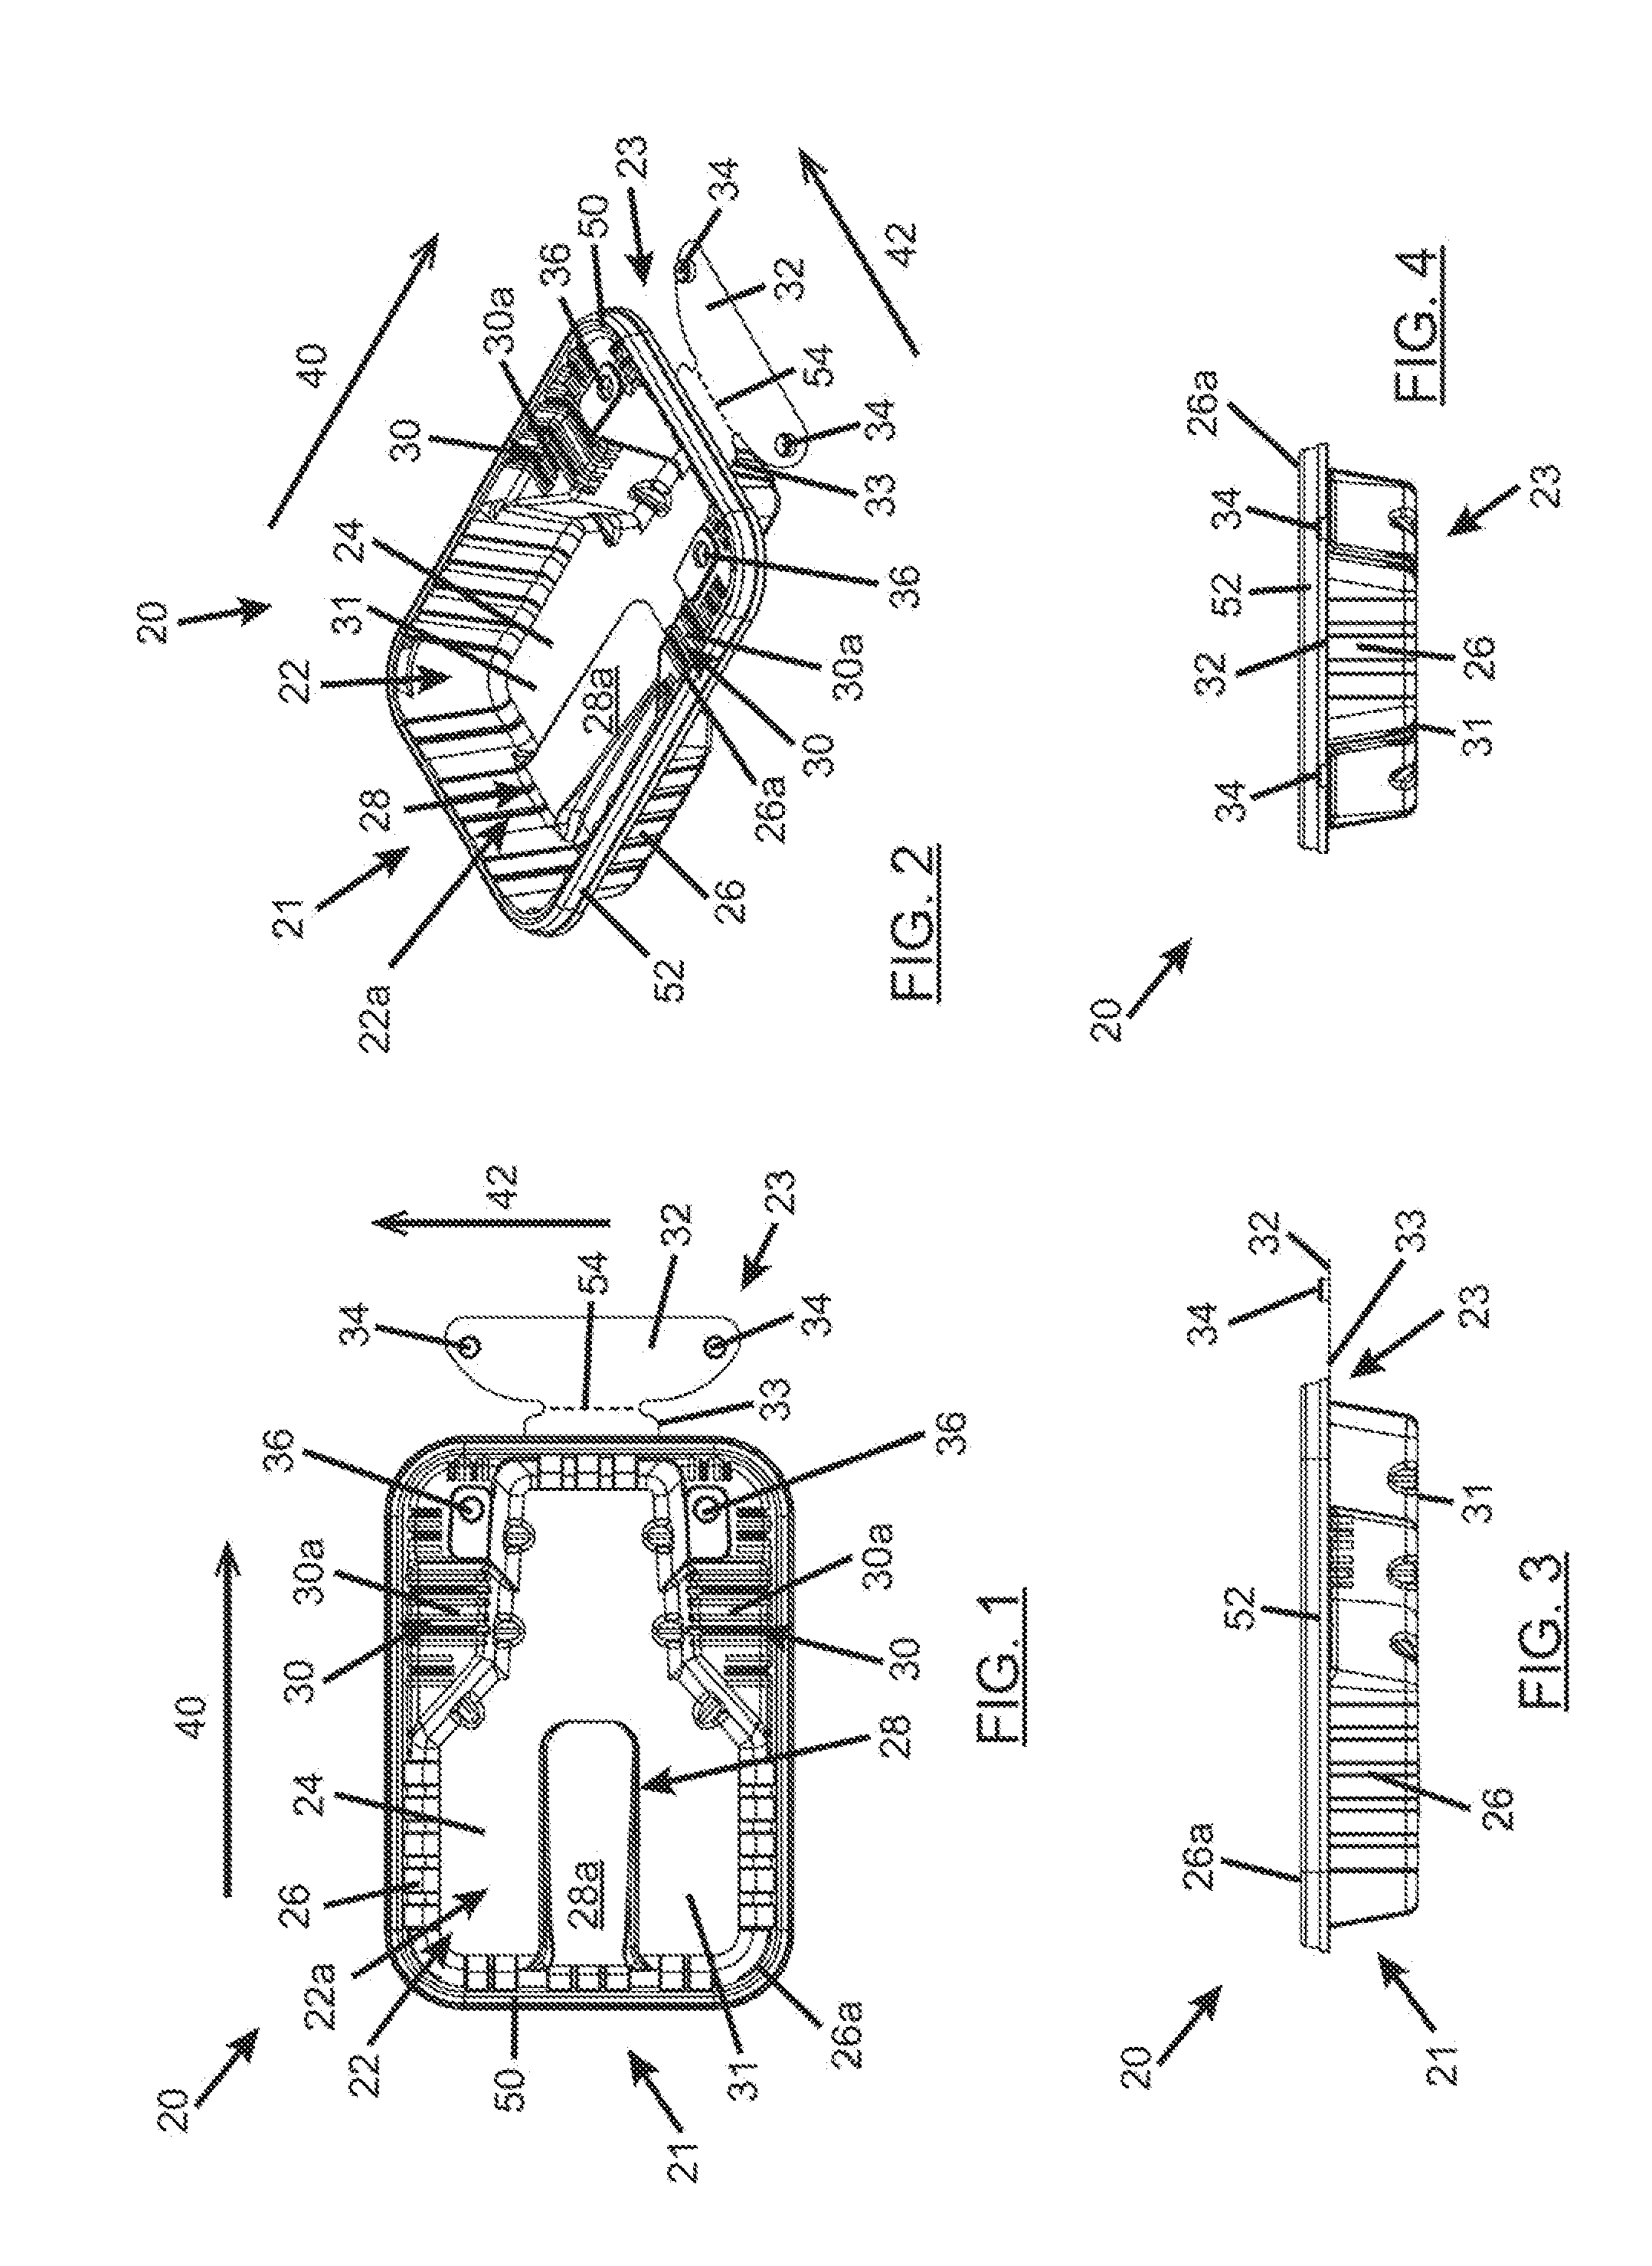 Poultry tray and method of packaging poultry using same